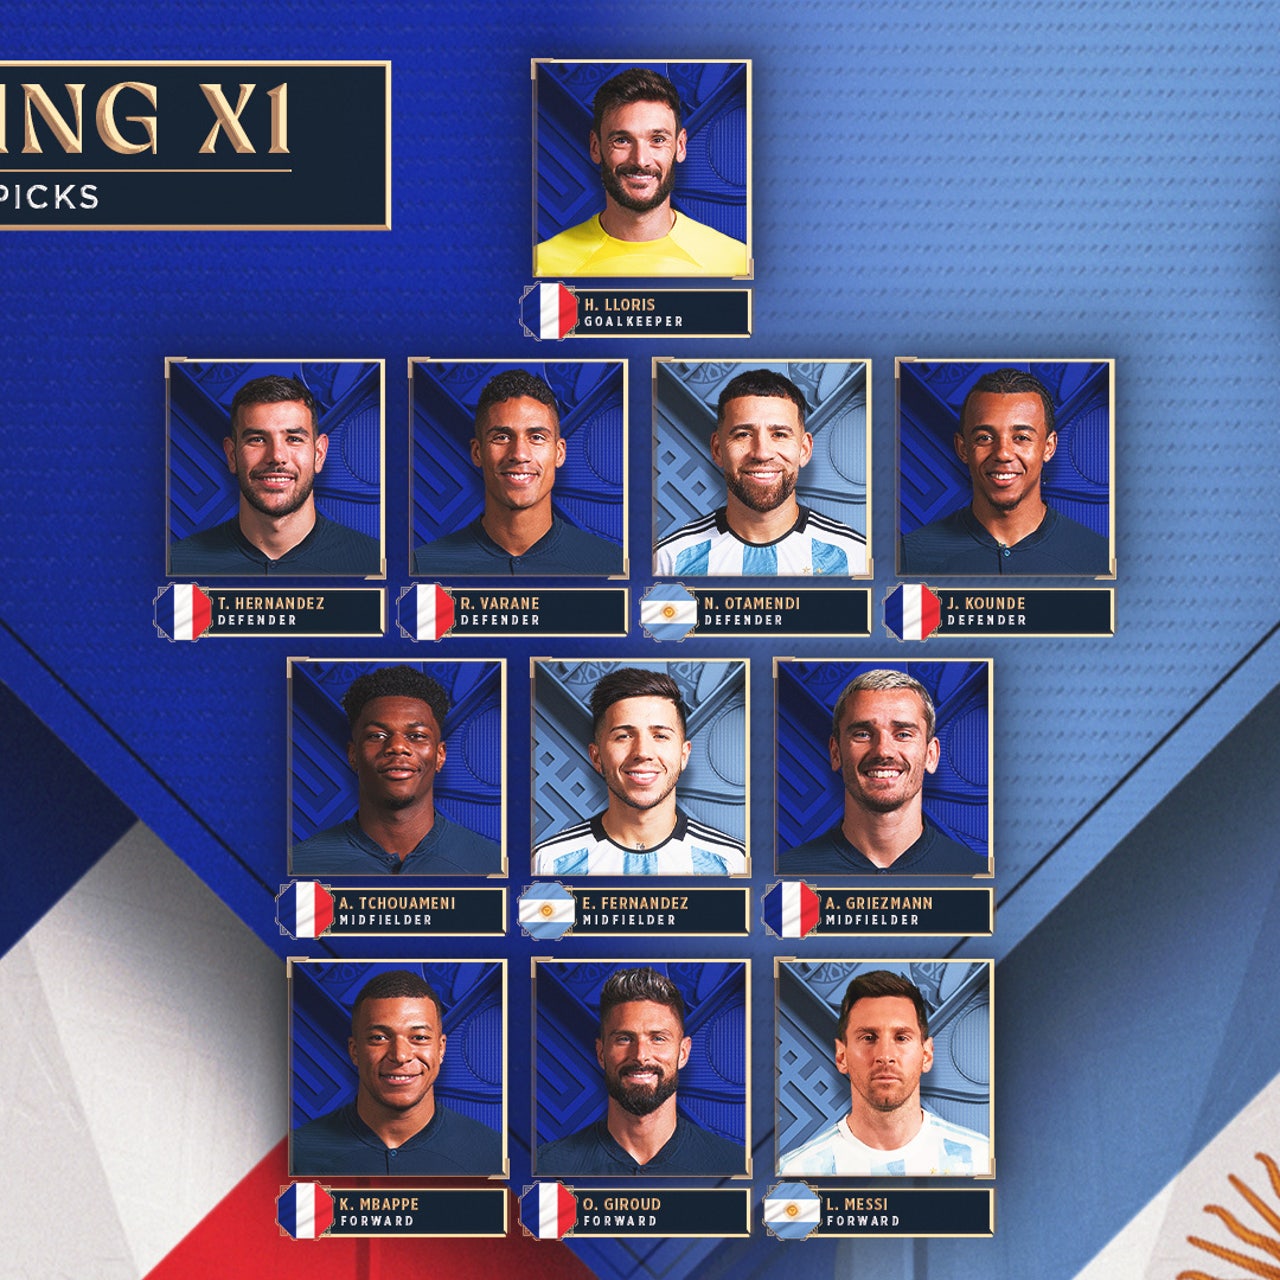 FIFA World Cup 2022: France v Argentina - Leading stats of the finalists